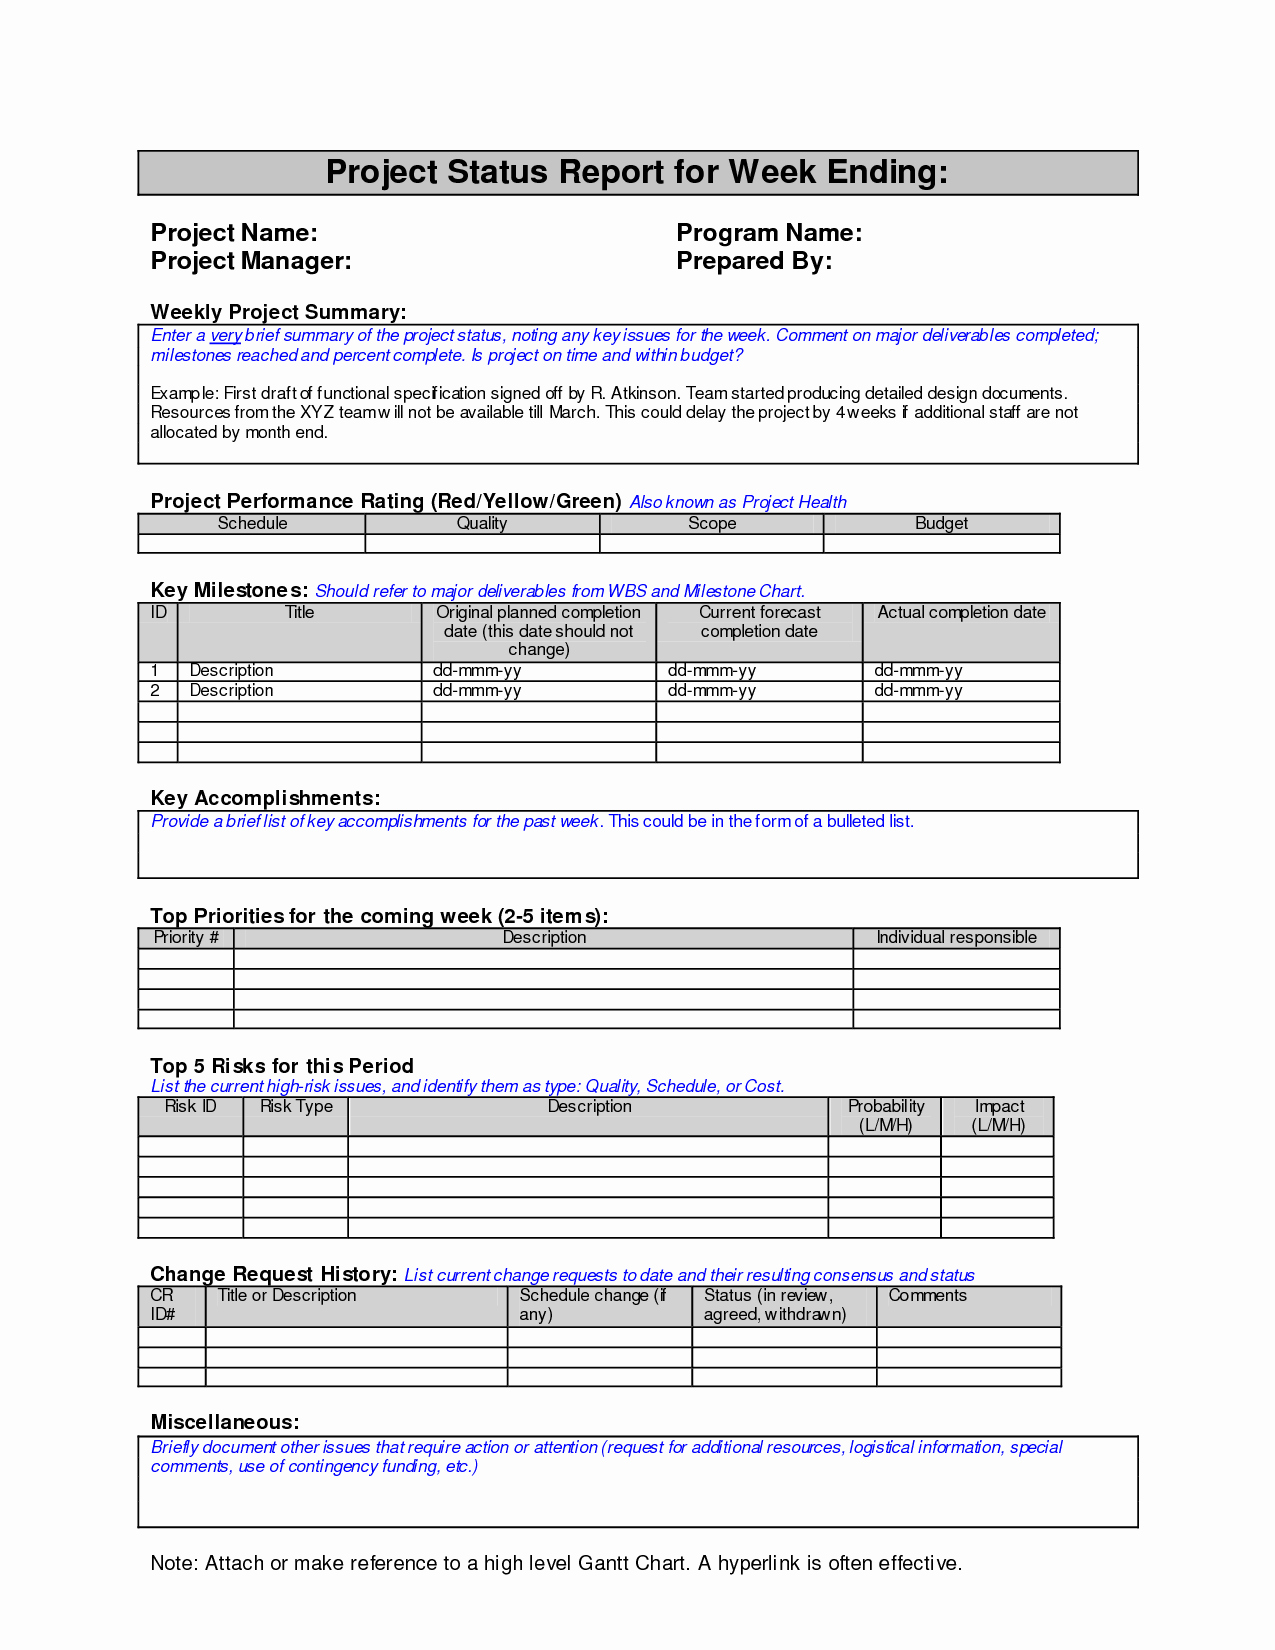 Weekly Project Status Report Templates Lovely Weekly Project Status Report Sample Google Search